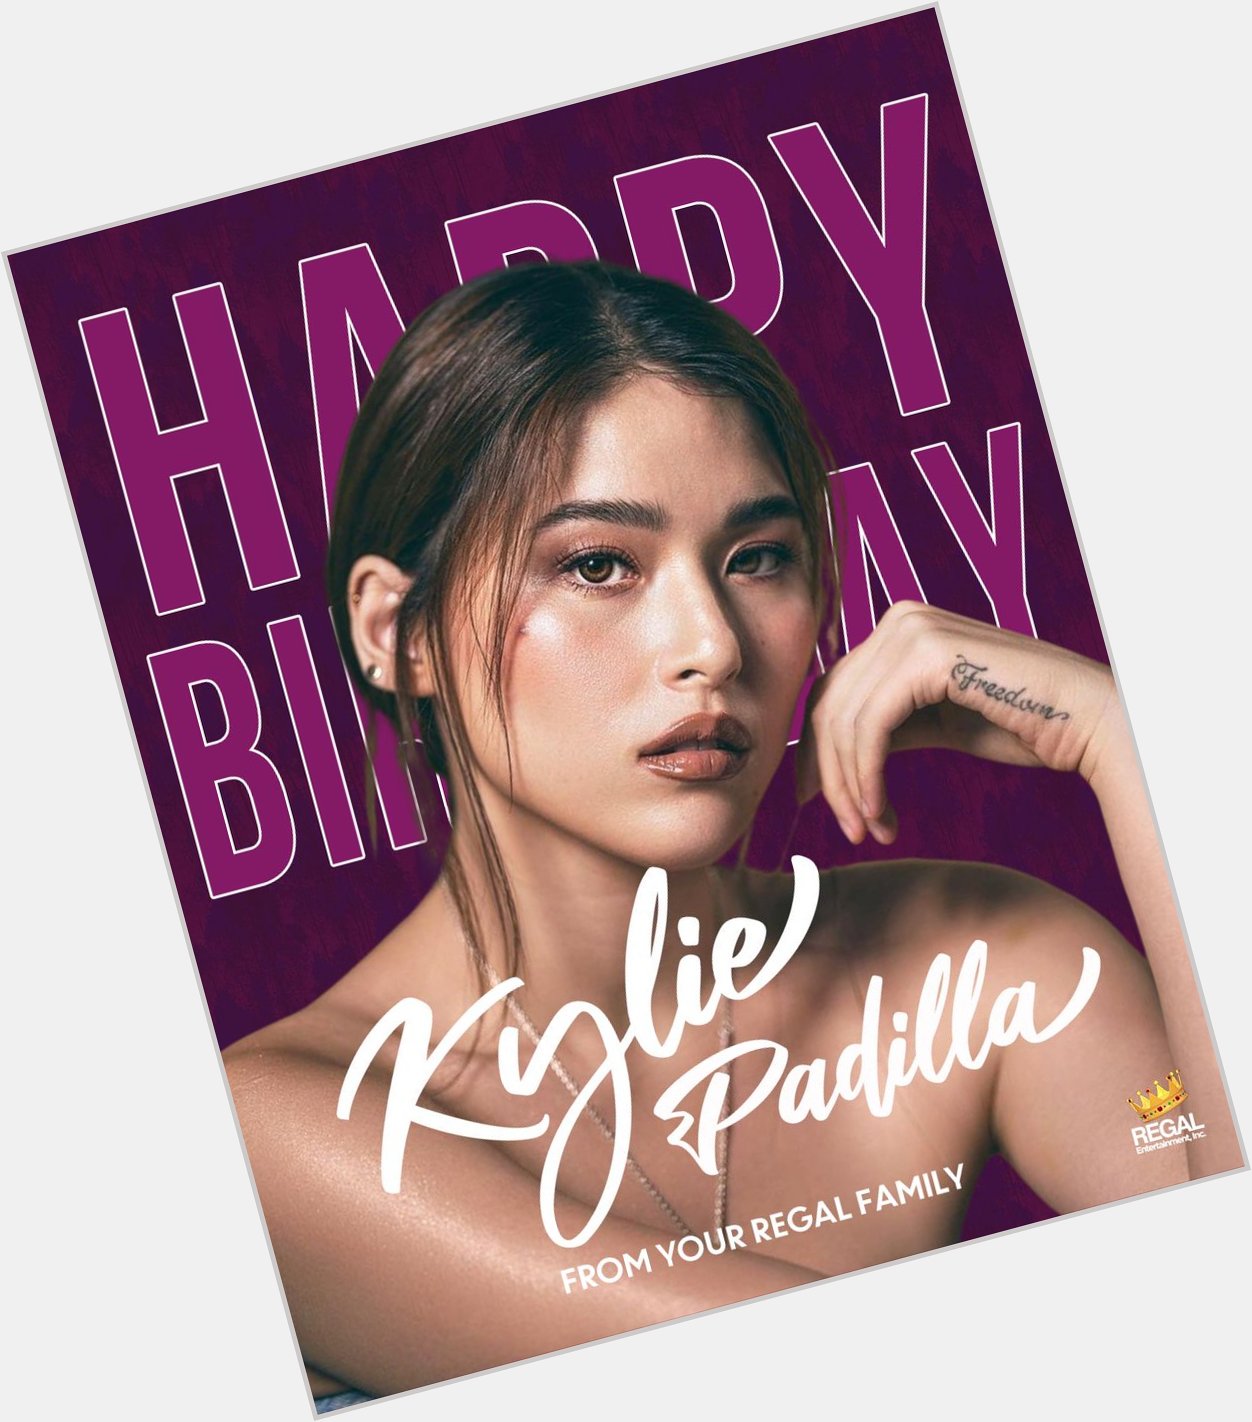 Happy Birthday, Kylie Padilla!  We wish you all the best in life! From your Regal Family! 